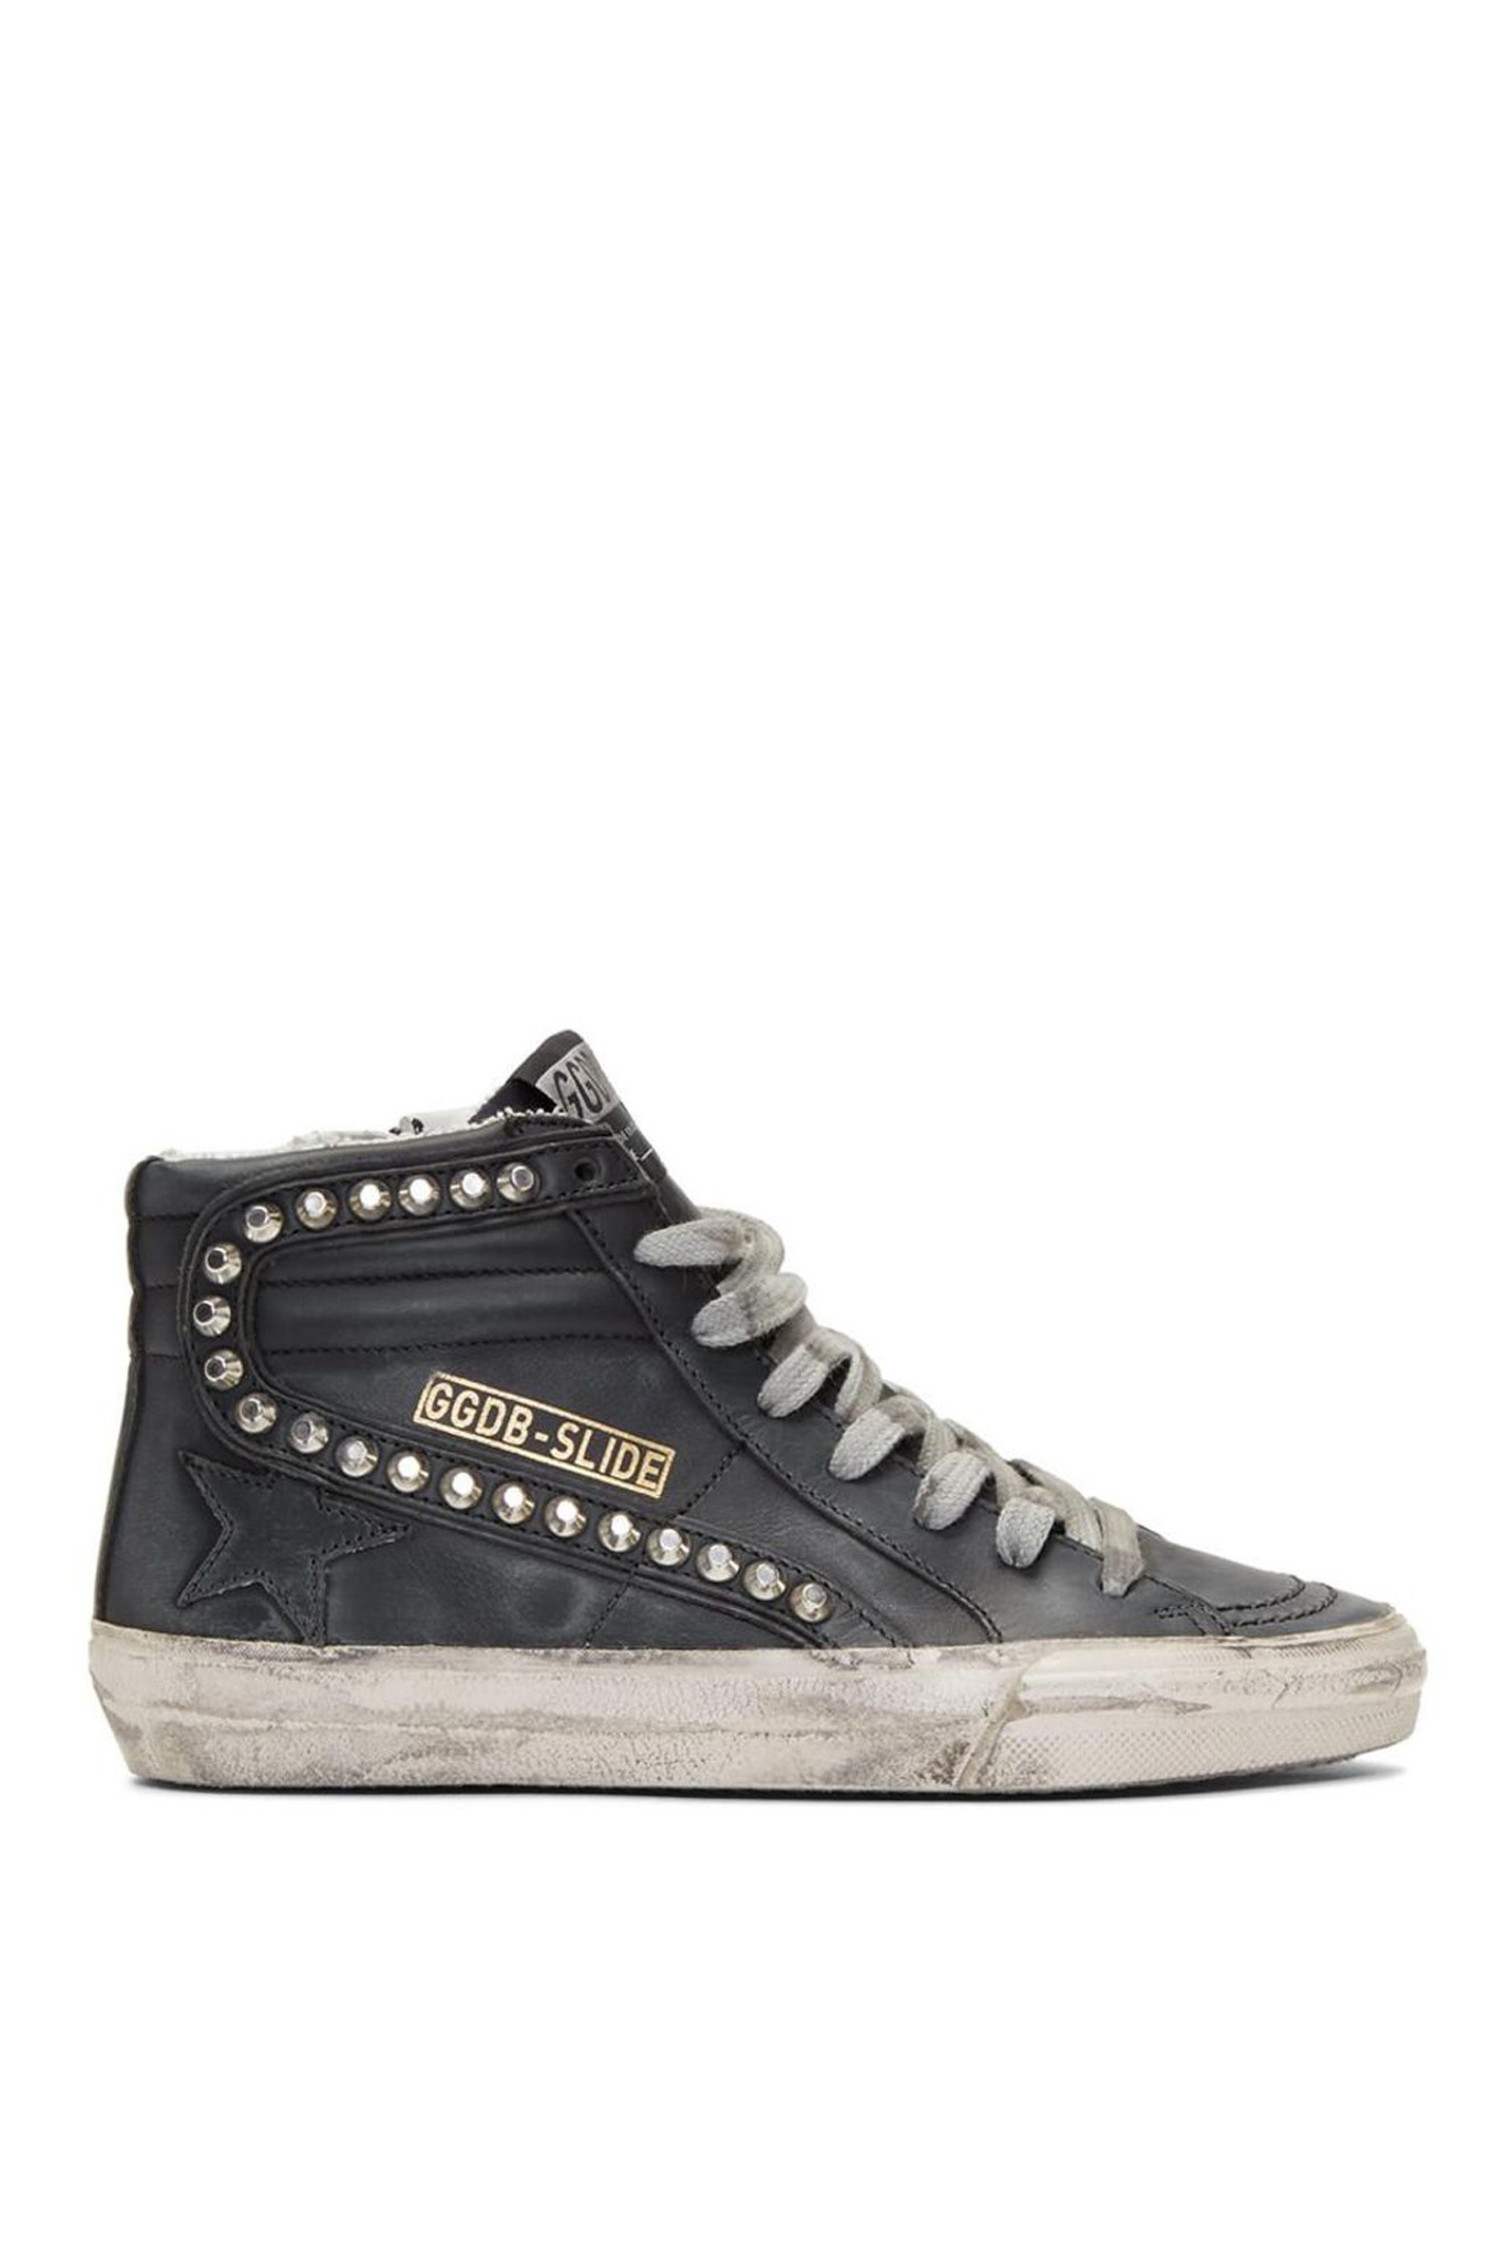 golden goose studded sneakers